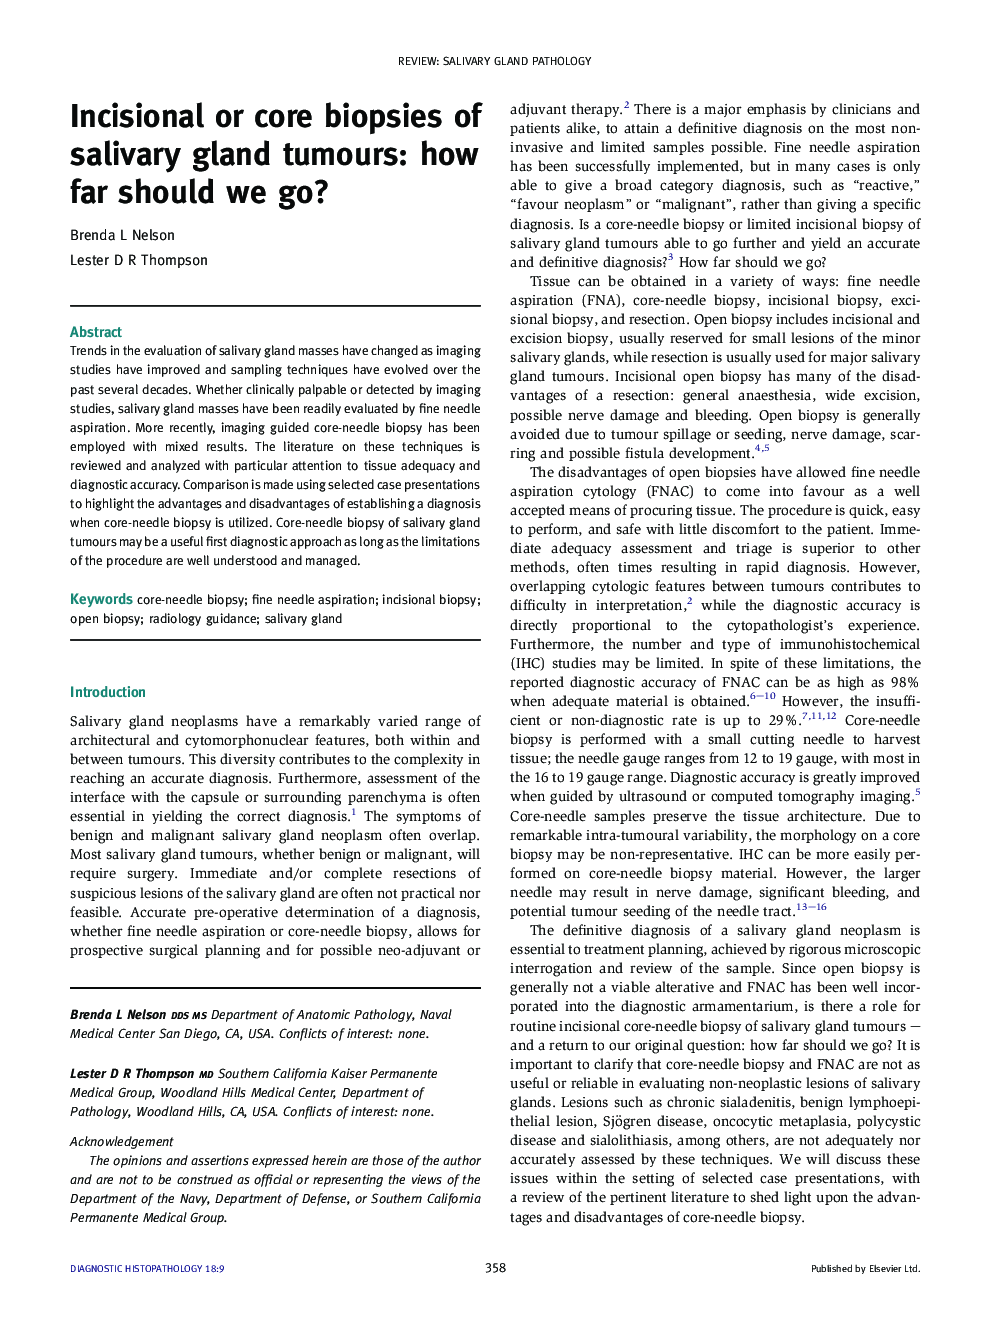 Incisional or core biopsies of salivary gland tumours: how far should we go?